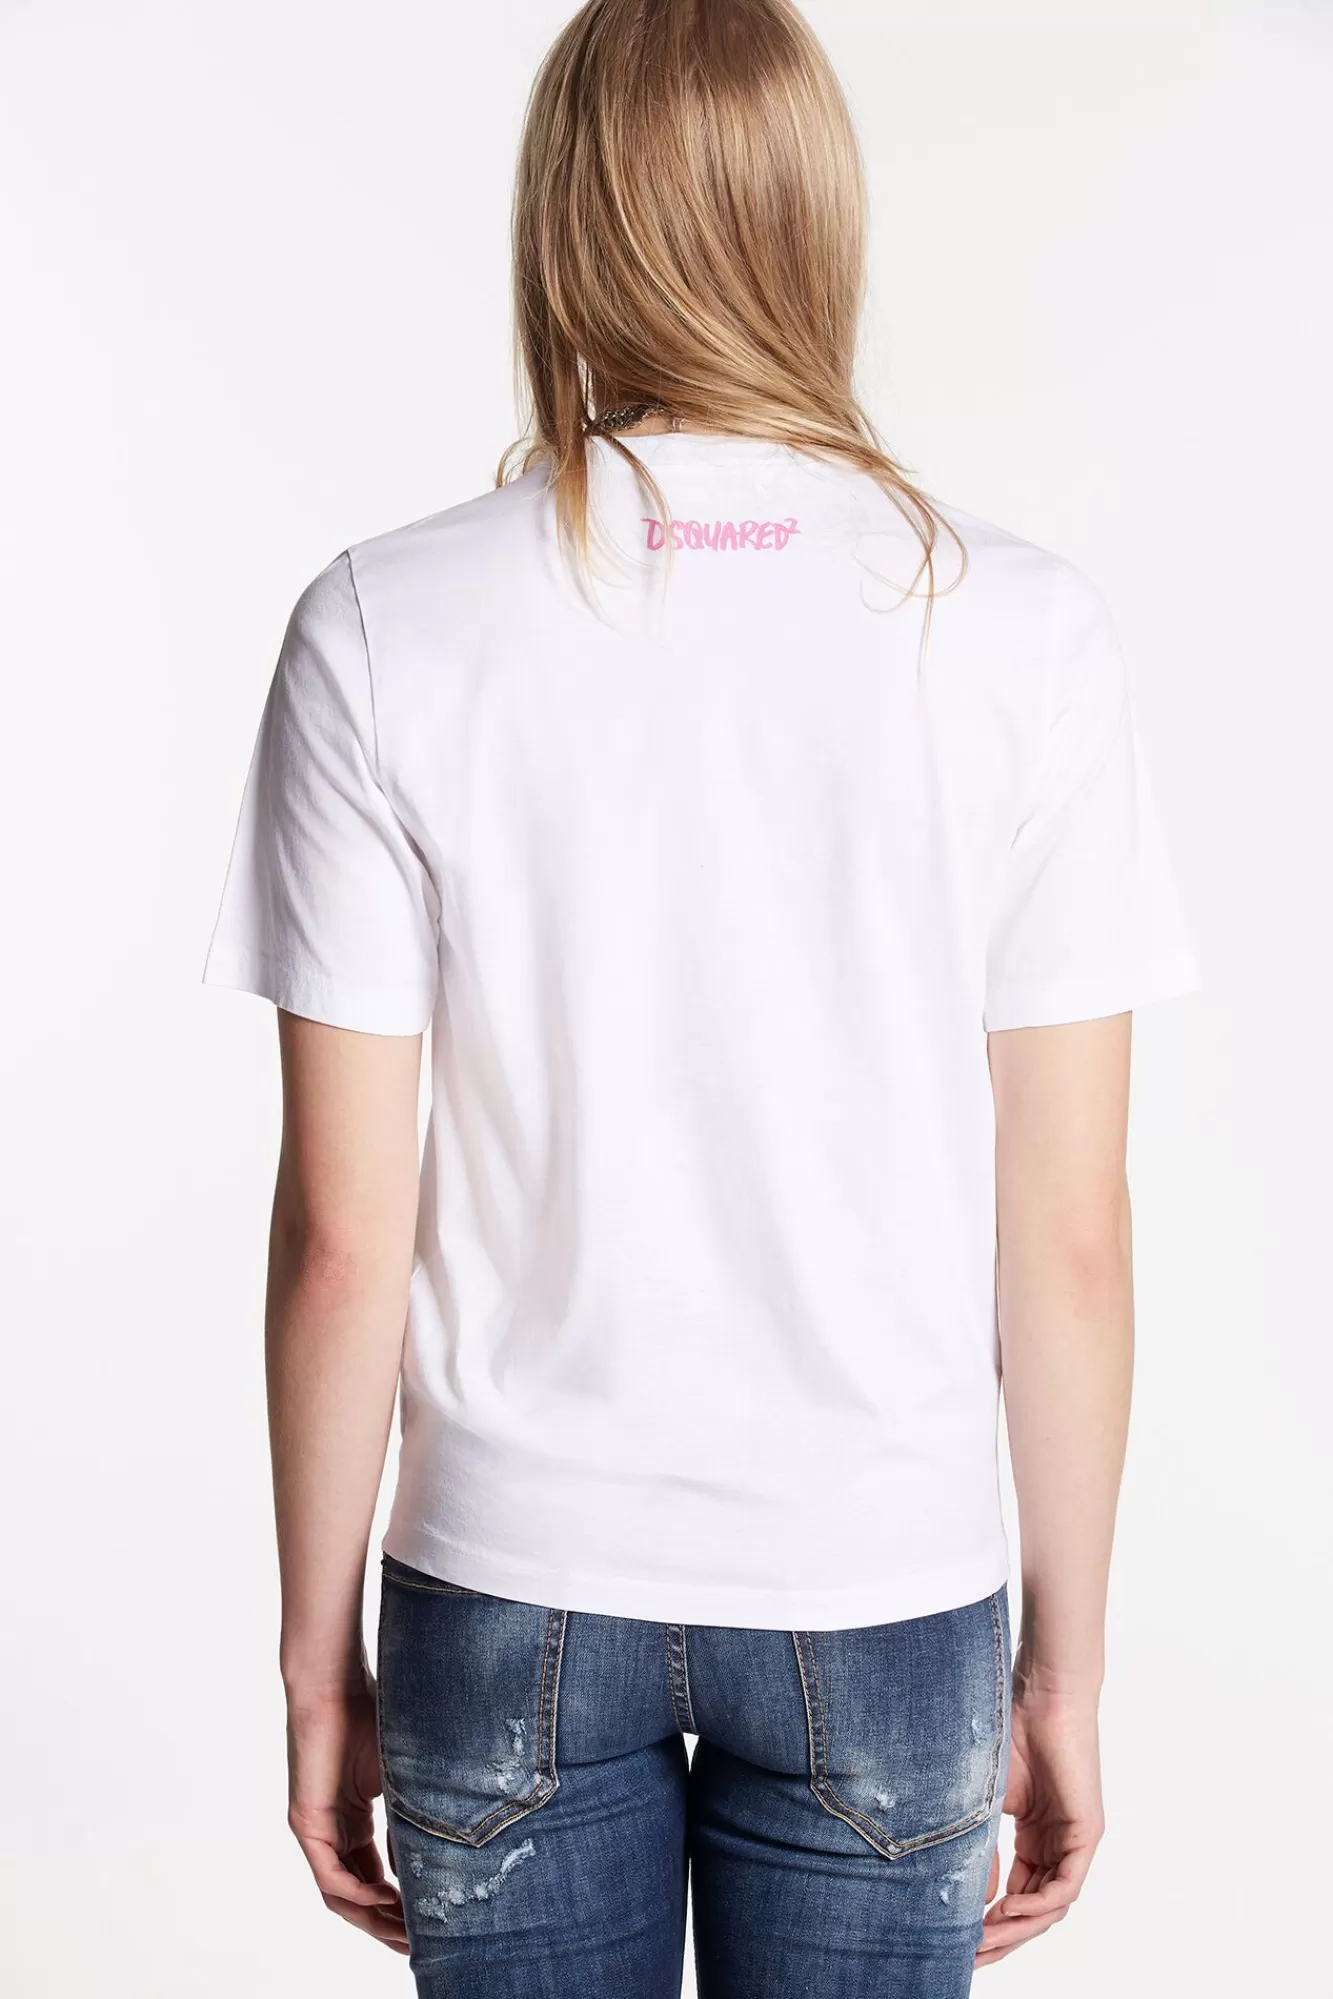 Easy T-Shirt<Dsquared2 Clearance